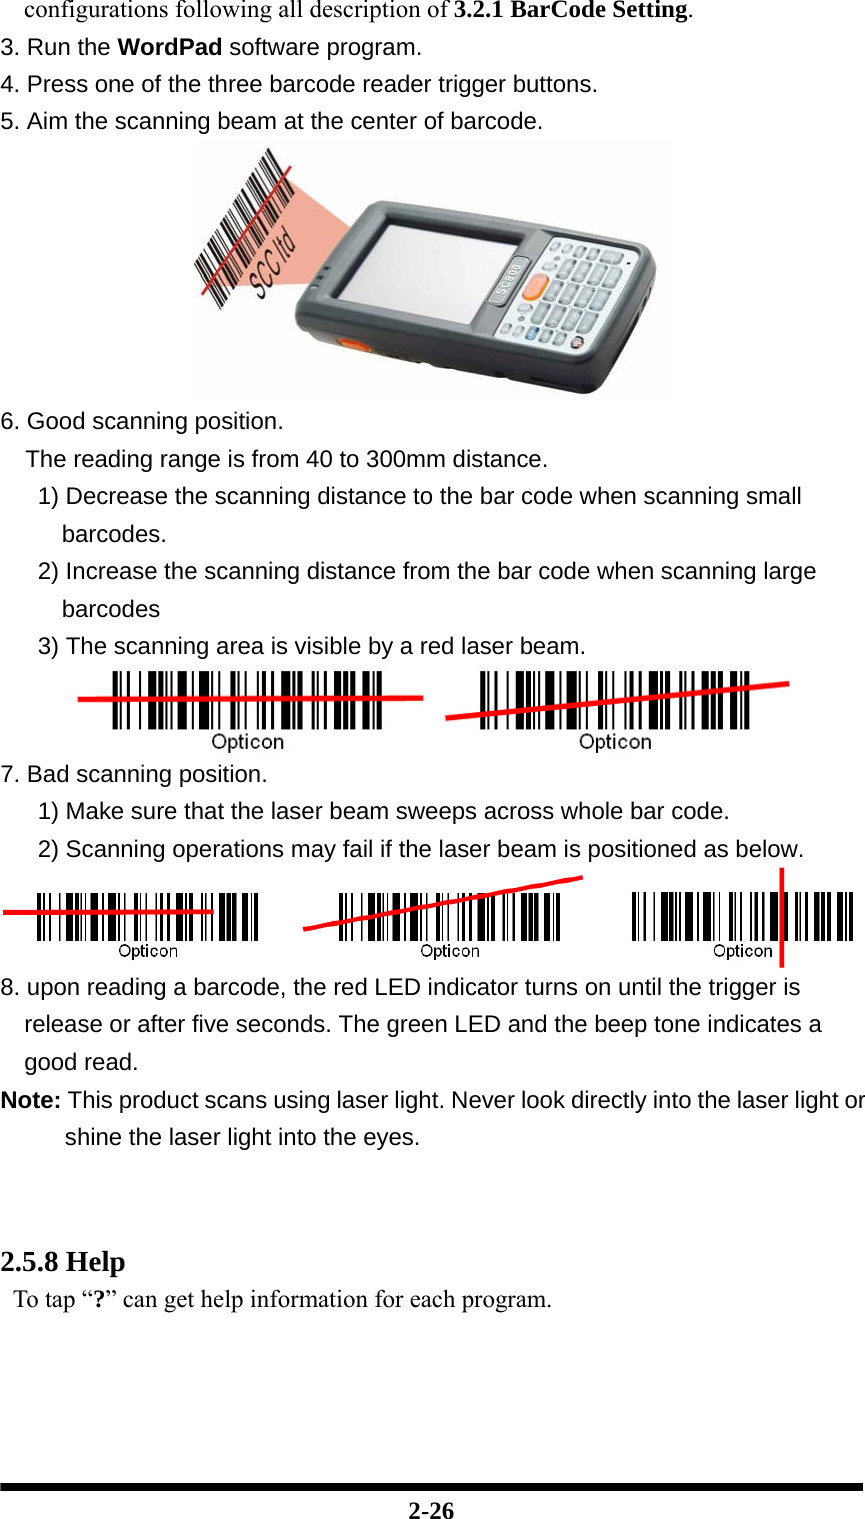  2-26 configurations following all description of 3.2.1 BarCode Setting. 3. Run the WordPad software program. 4. Press one of the three barcode reader trigger buttons. 5. Aim the scanning beam at the center of barcode.  6. Good scanning position. The reading range is from 40 to 300mm distance. 1) Decrease the scanning distance to the bar code when scanning small barcodes. 2) Increase the scanning distance from the bar code when scanning large barcodes 3) The scanning area is visible by a red laser beam.  7. Bad scanning position. 1) Make sure that the laser beam sweeps across whole bar code. 2) Scanning operations may fail if the laser beam is positioned as below.  8. upon reading a barcode, the red LED indicator turns on until the trigger is release or after five seconds. The green LED and the beep tone indicates a good read. Note: This product scans using laser light. Never look directly into the laser light or shine the laser light into the eyes.    2.5.8 Help To tap “?” can get help information for each program.    